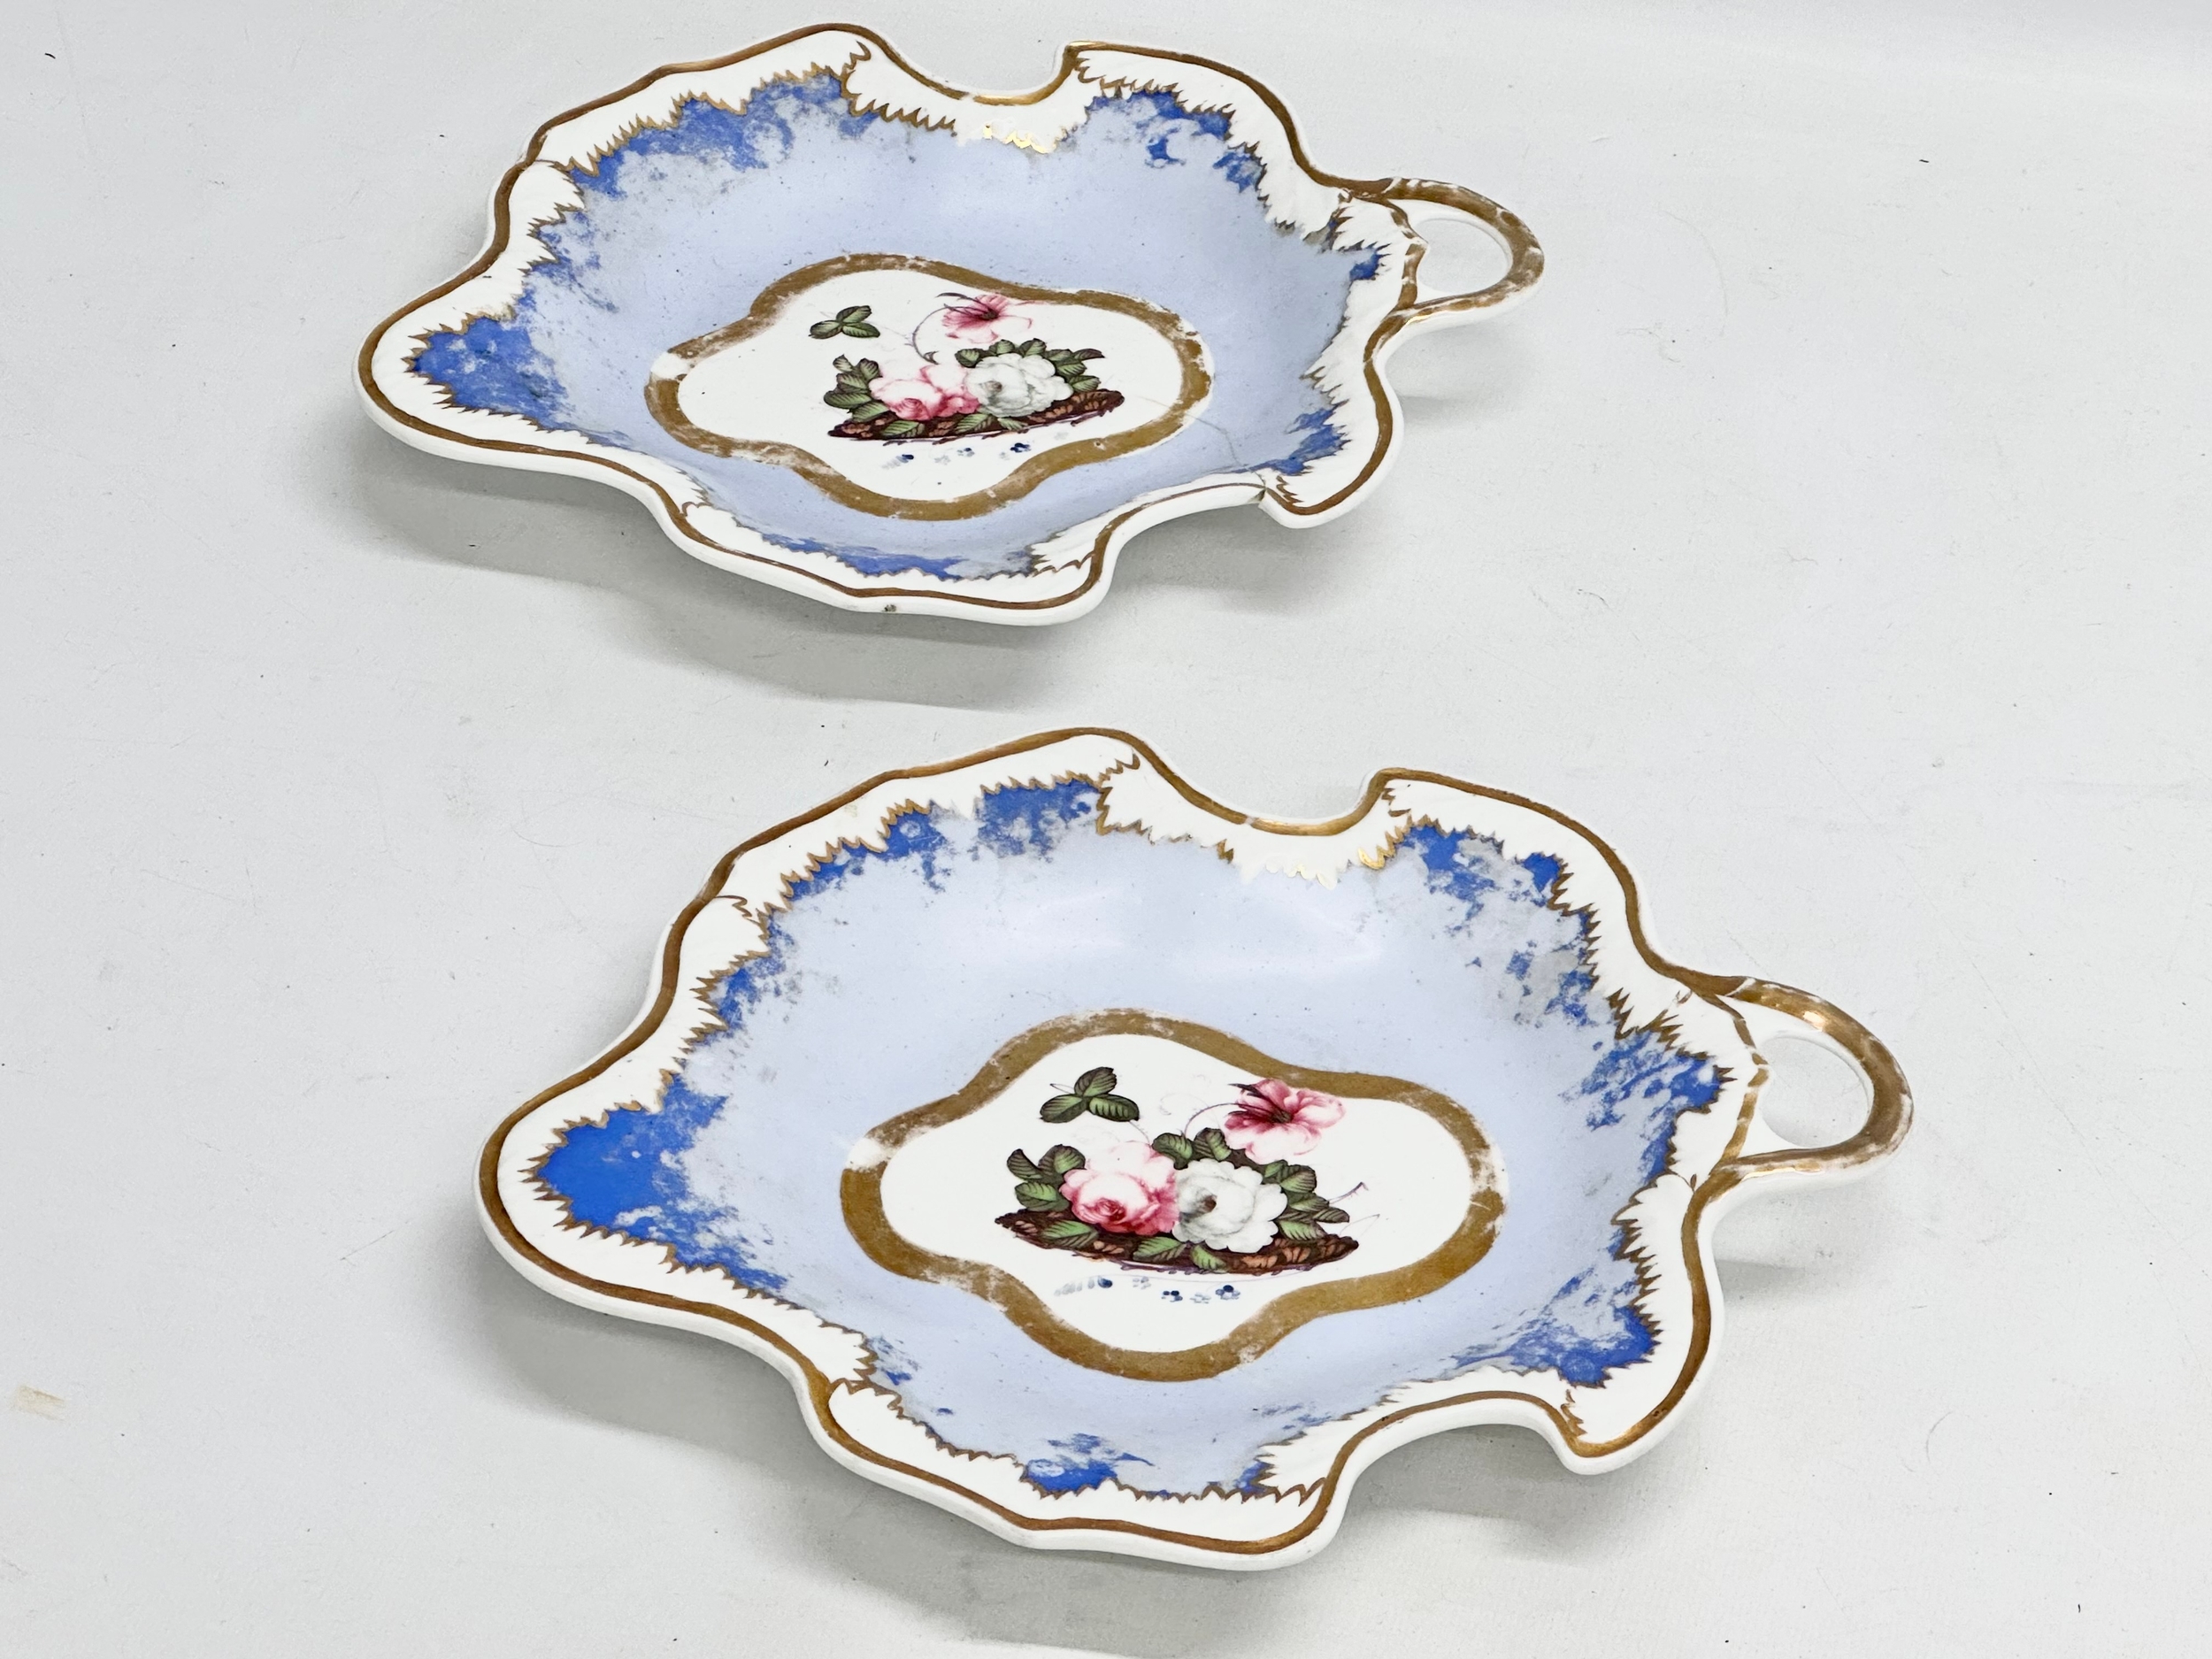 An early 19th century Samuel Alcock ‘Periwinkle’ part dinner service. Circa 1822-1830. - Image 9 of 15